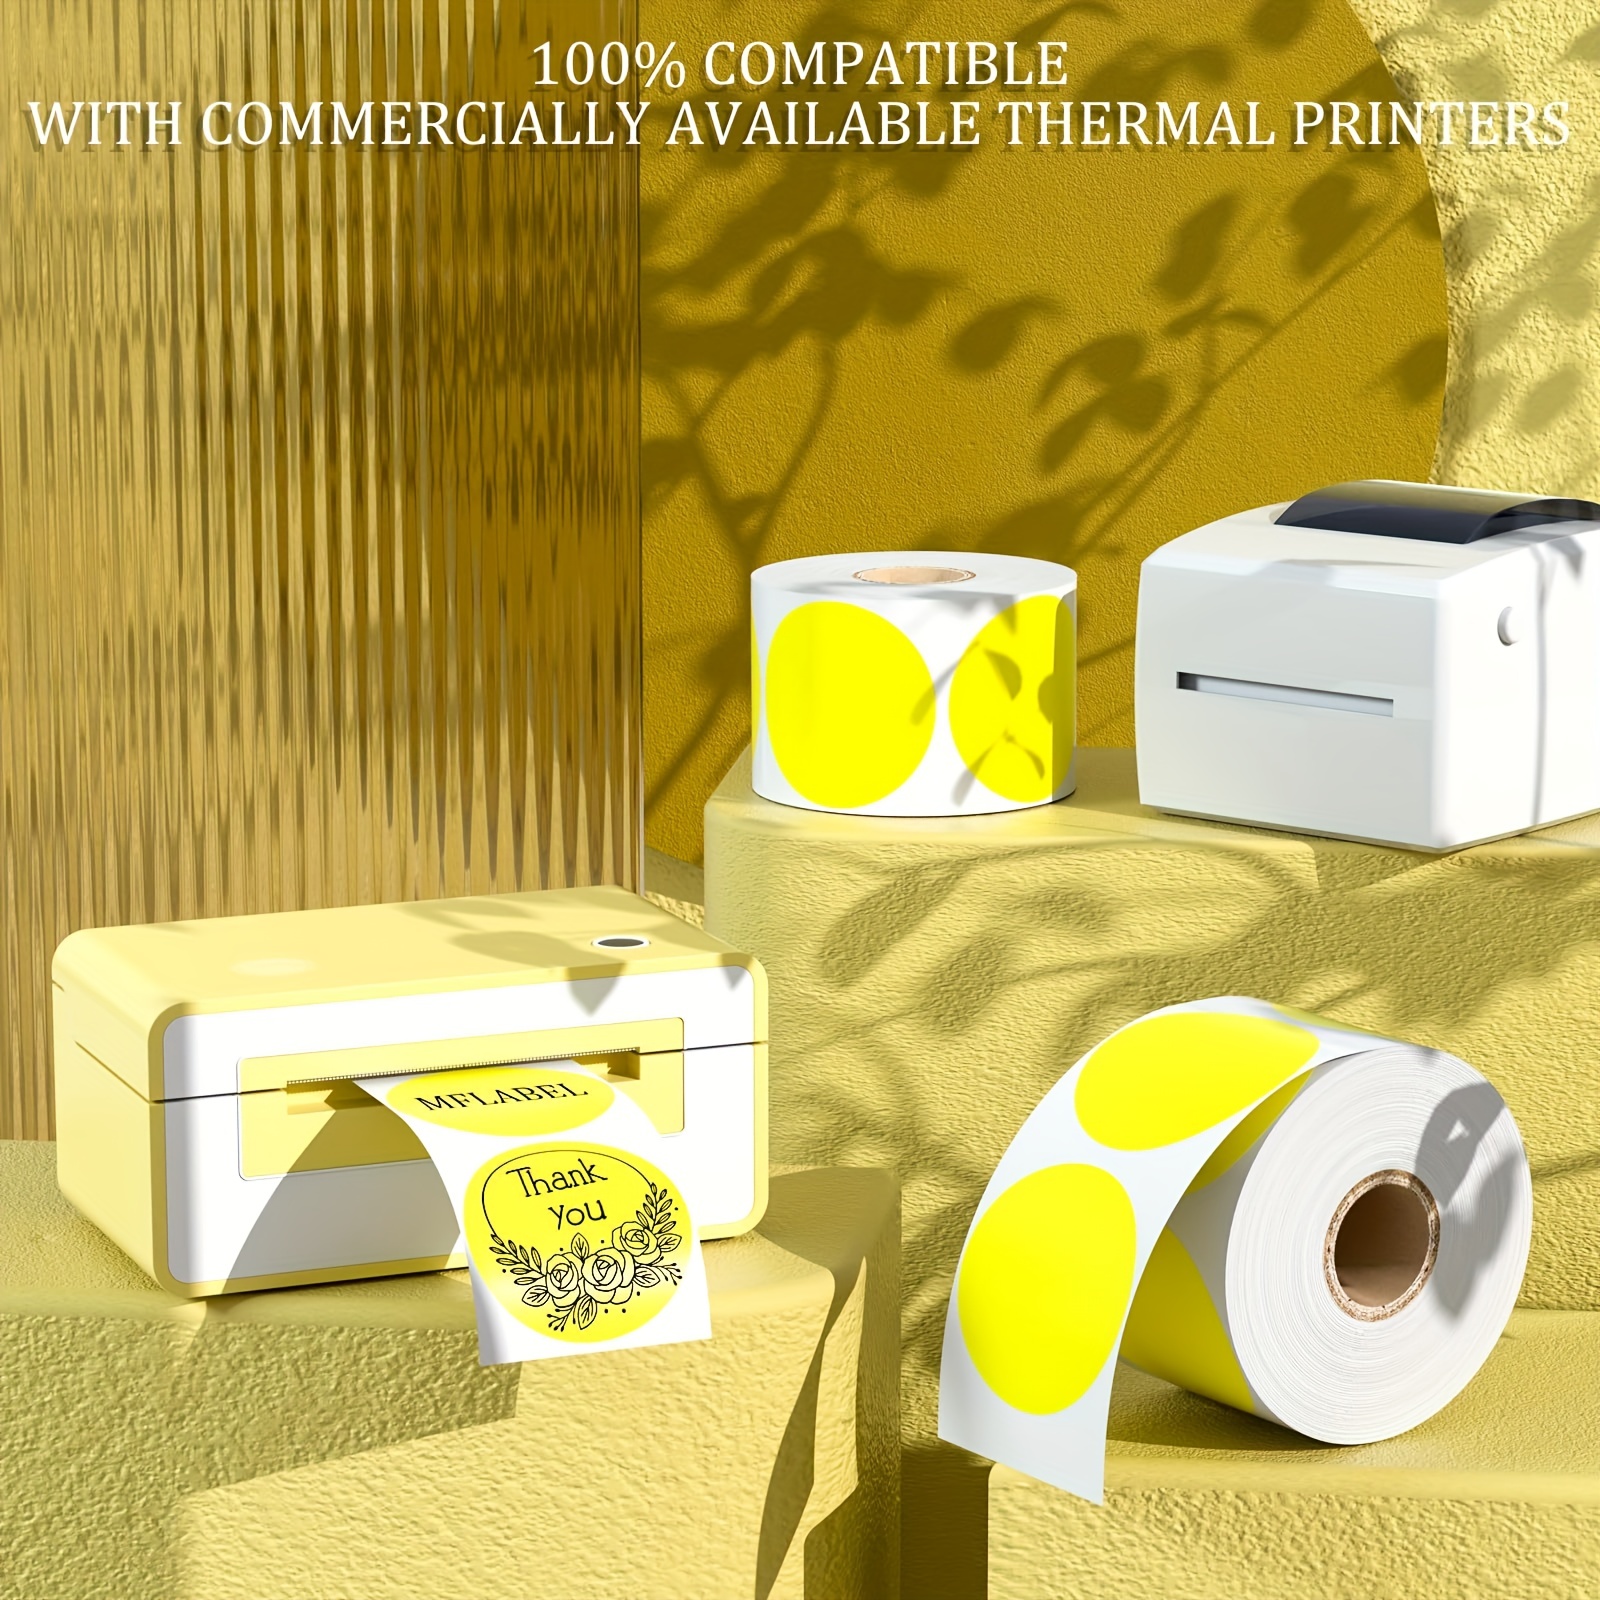 WHITE CUSTOM TISSUE PAPER ROLL WITH 100 CUSTOM STICKERS.